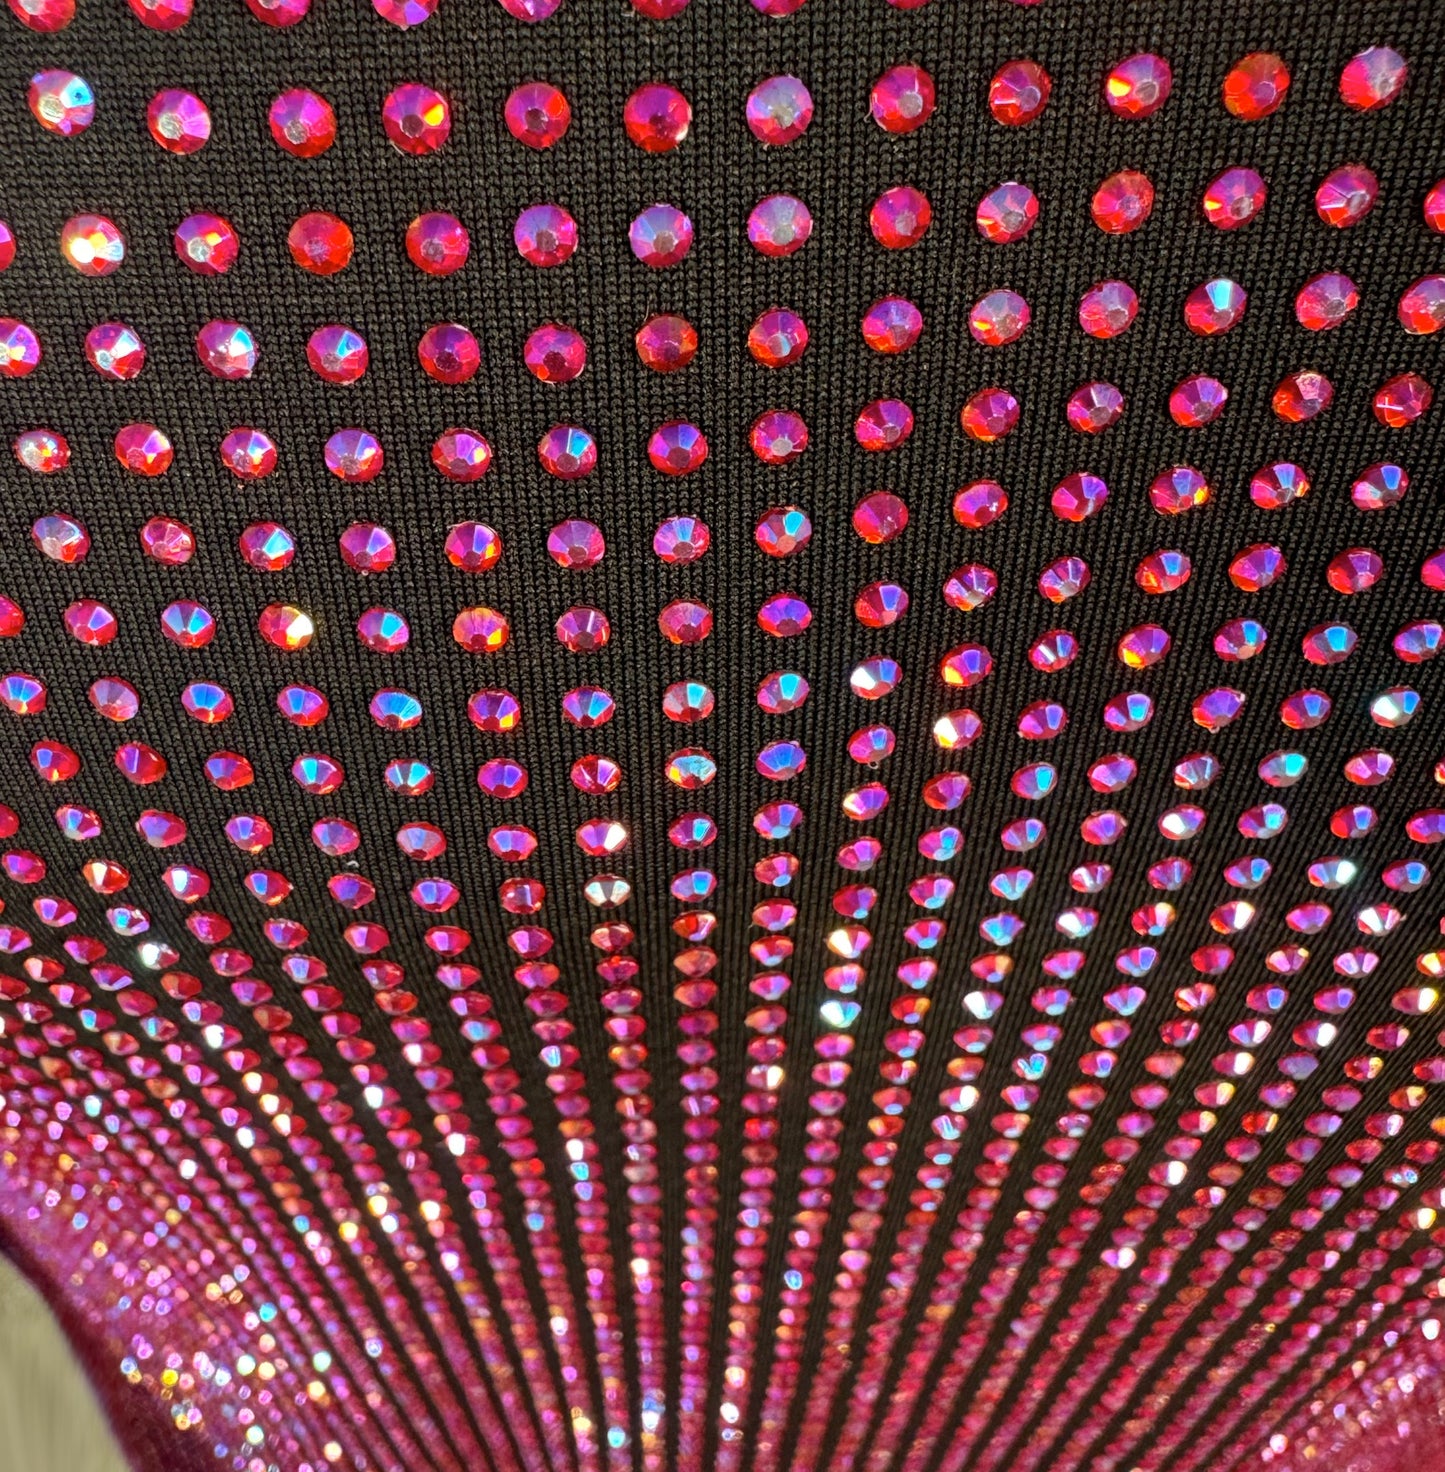 Looking down at Lt. Siam AB Crystals on Black Fabric T-shirt showing a close up of the rhinestone grid pattern and the sparkles as your focus shifts.